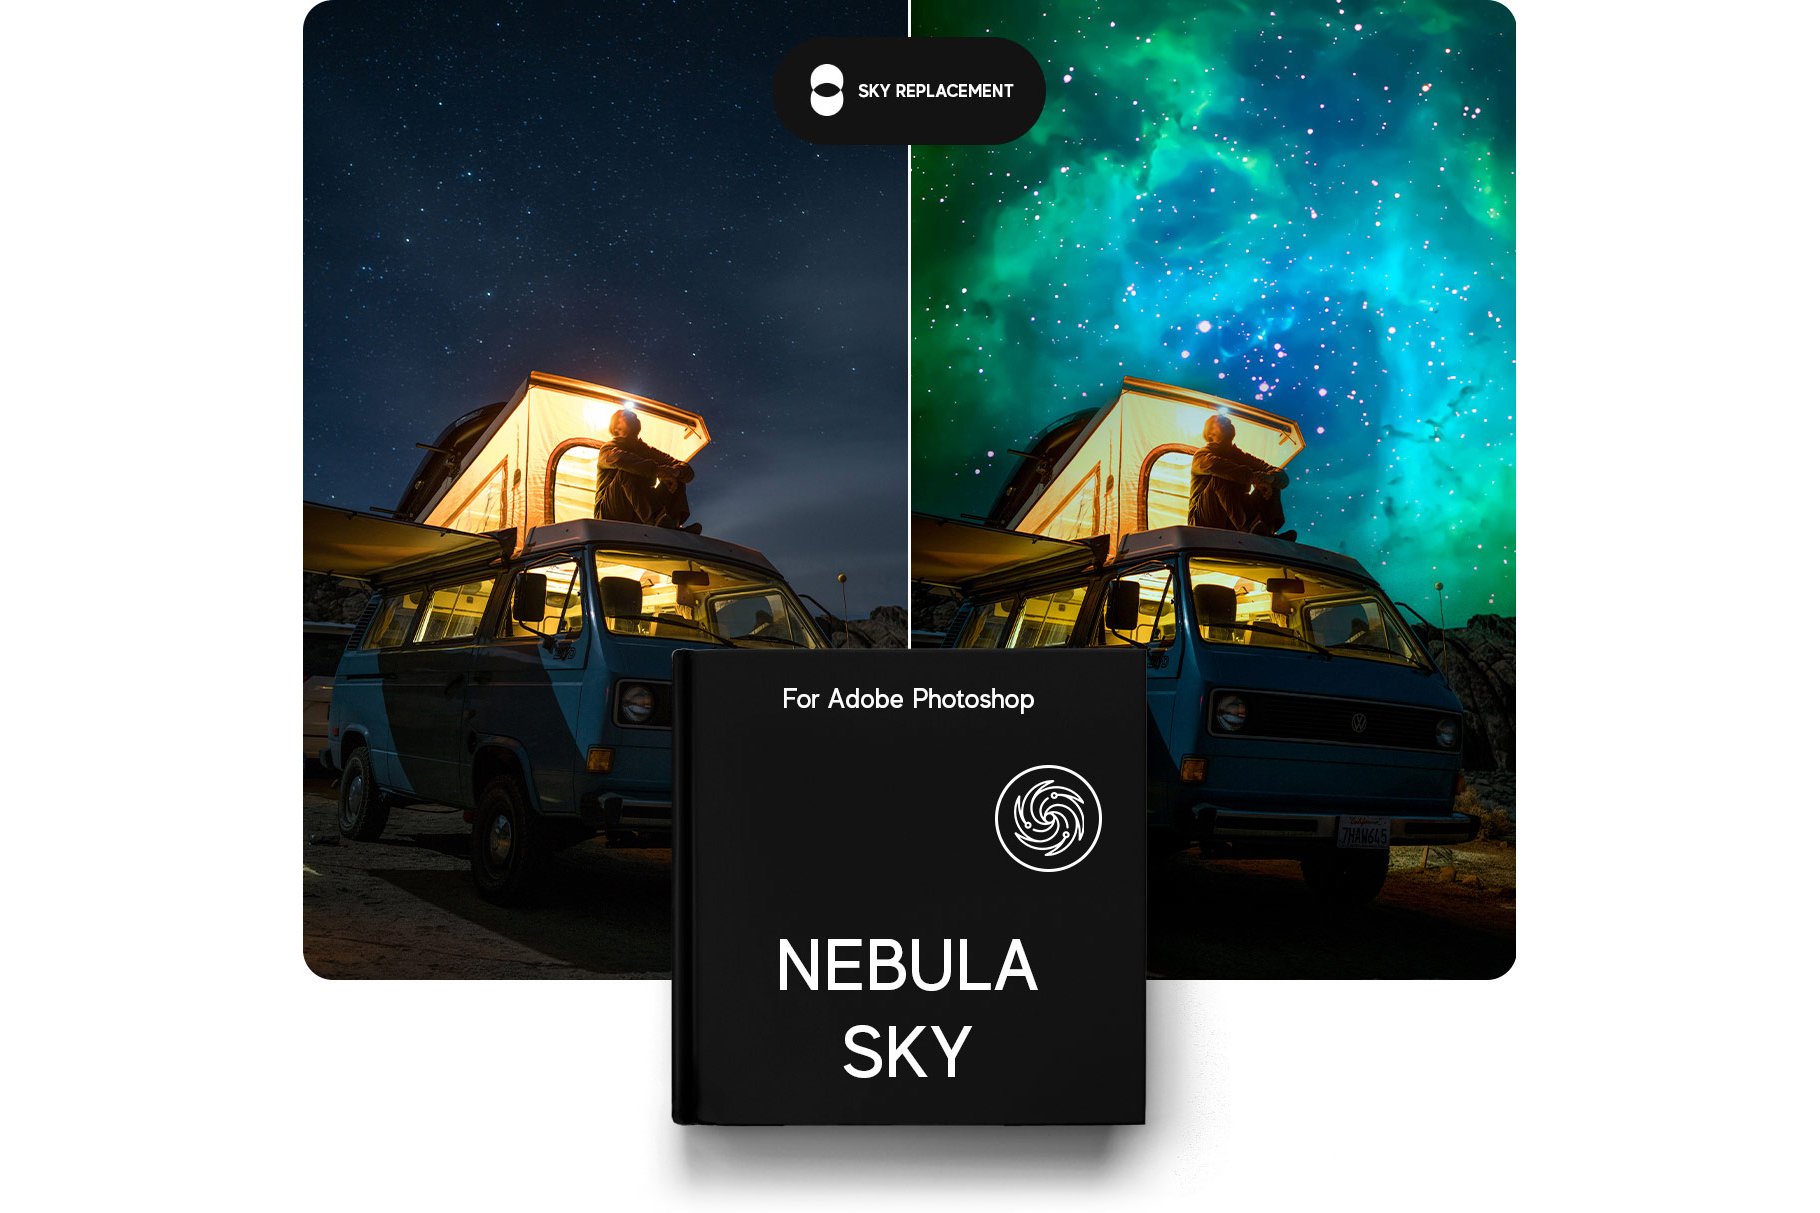 Nebula Sky Replacement Packcover image.